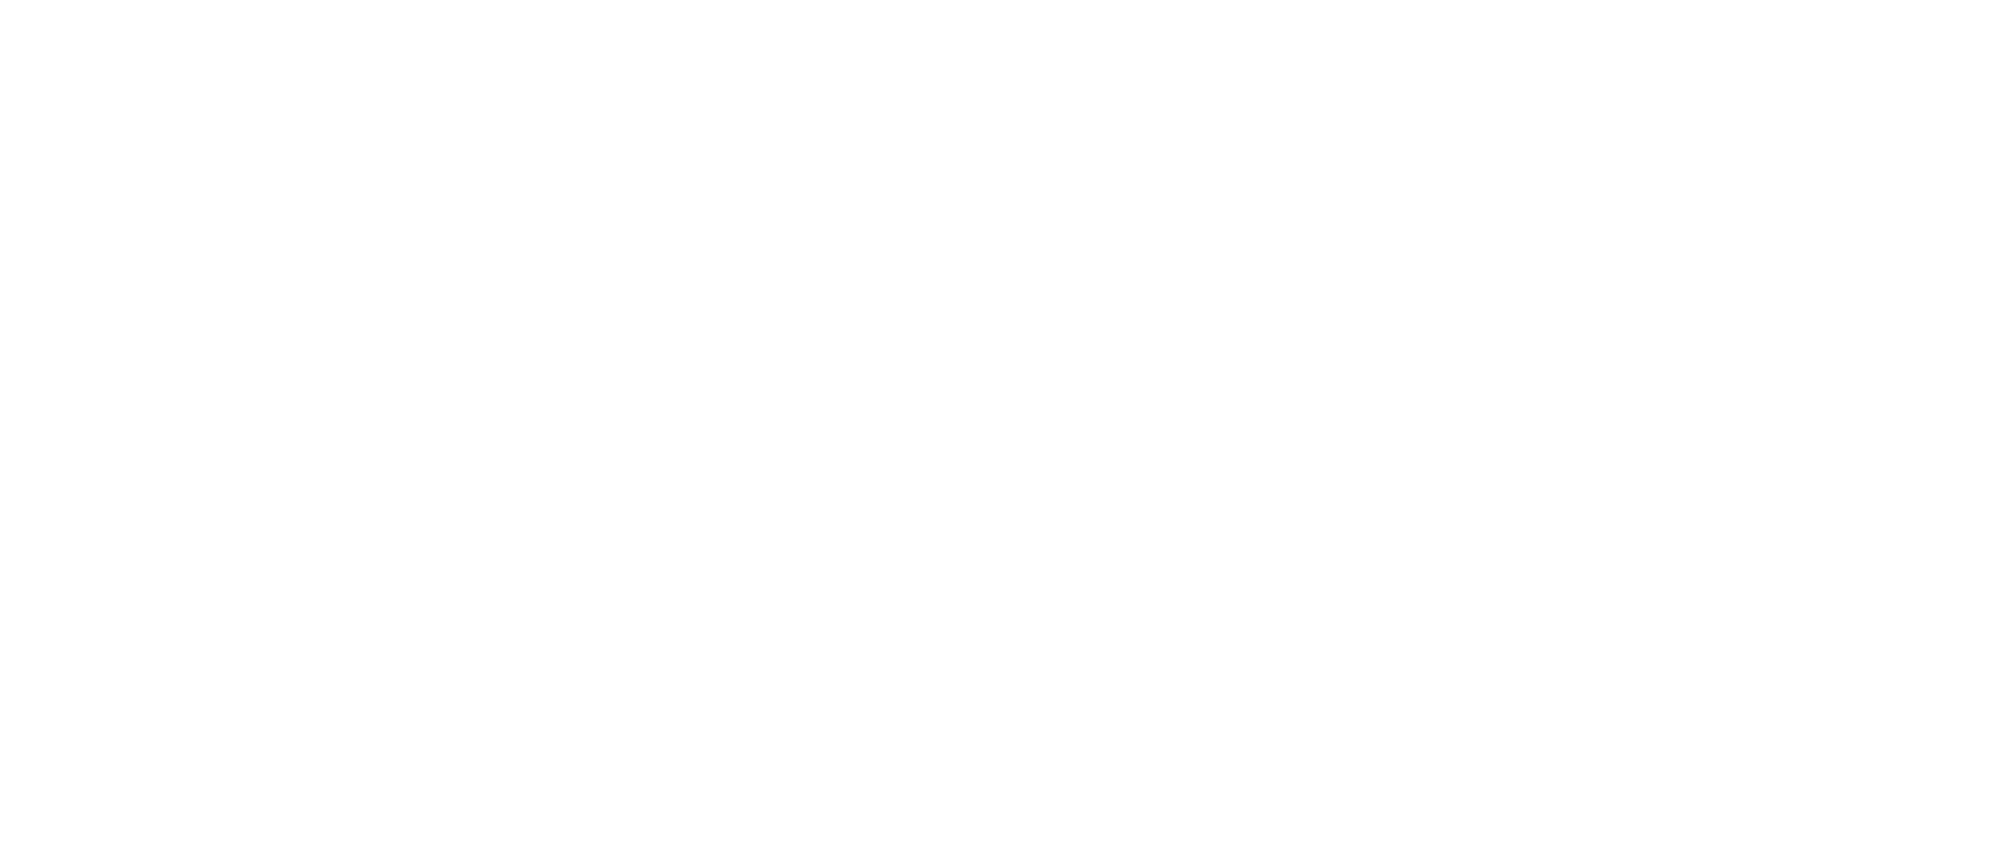 Adore Homeliving